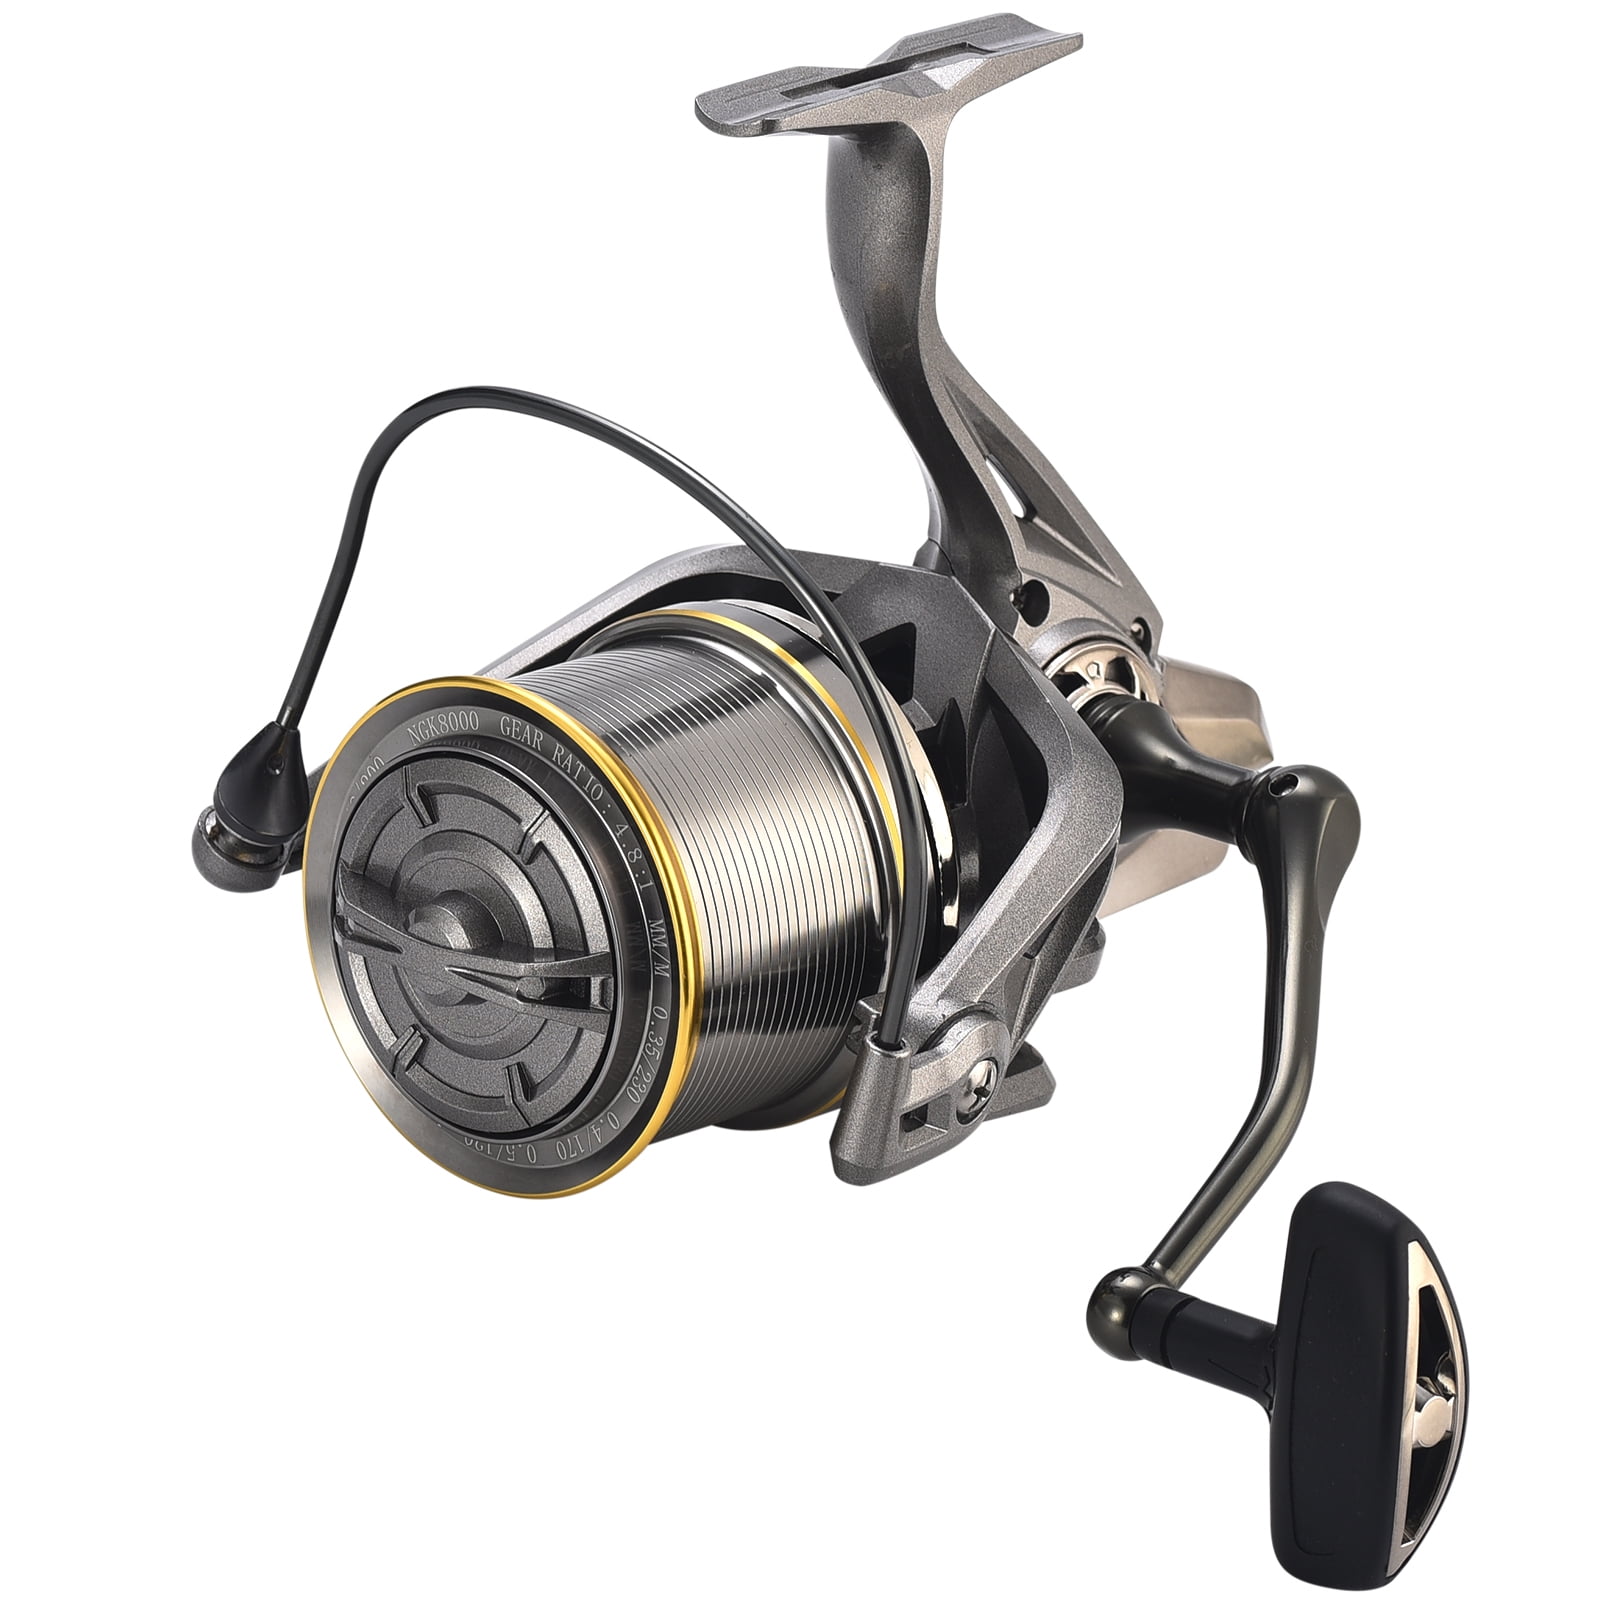 17+1BB Spinning Reel 4.8:1 with Interchangeable Left and Right